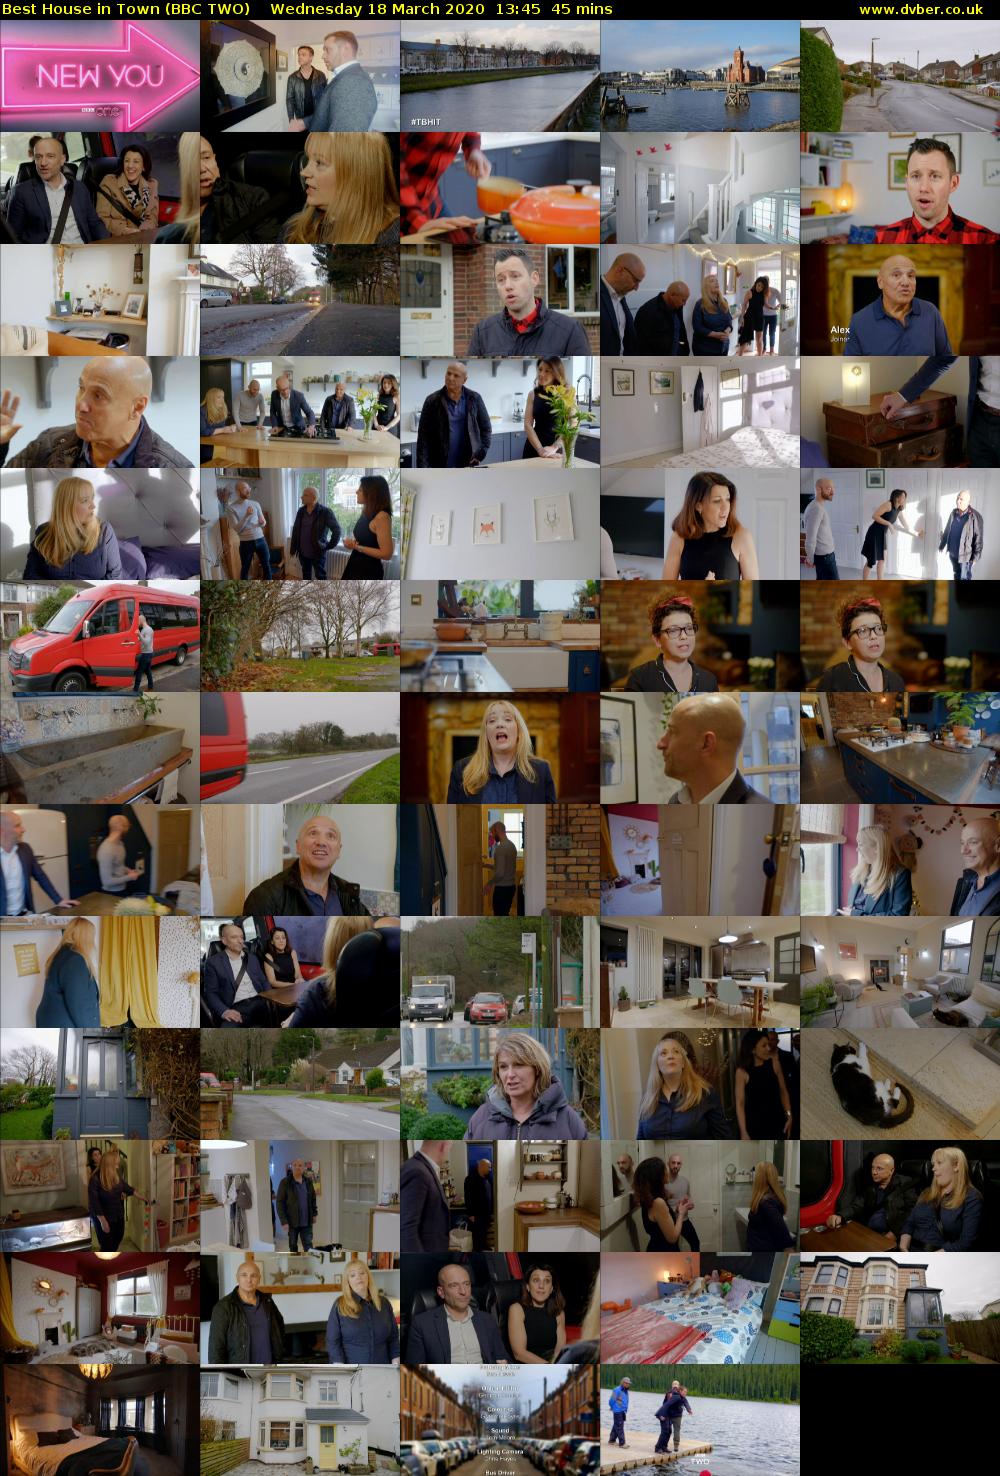 Best House in Town (BBC TWO) Wednesday 18 March 2020 13:45 - 14:30